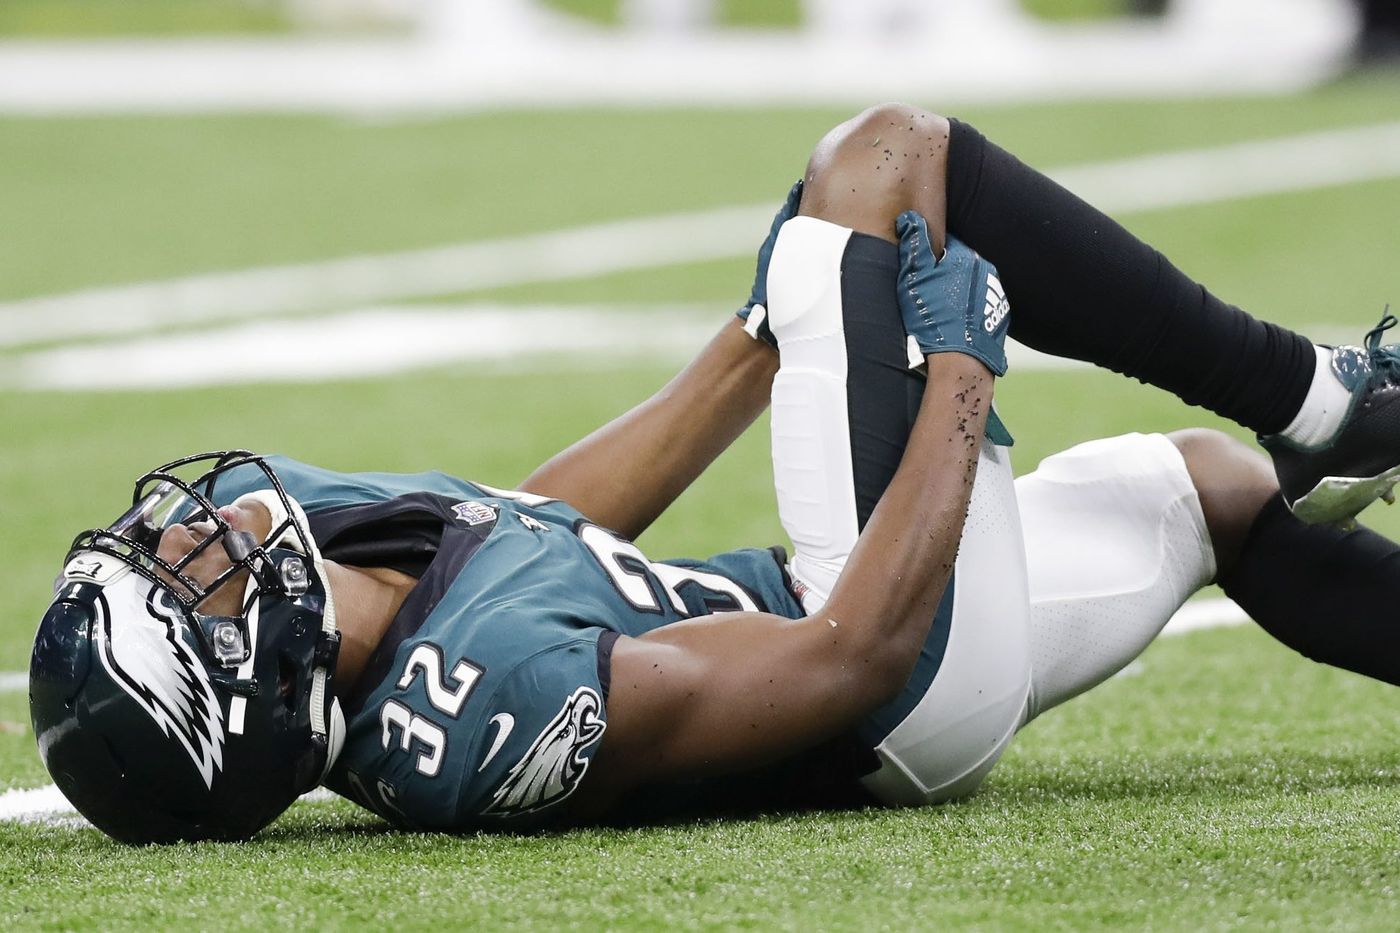 Were The Eagles Defensive Backs Wearing The Wrong Shoes?